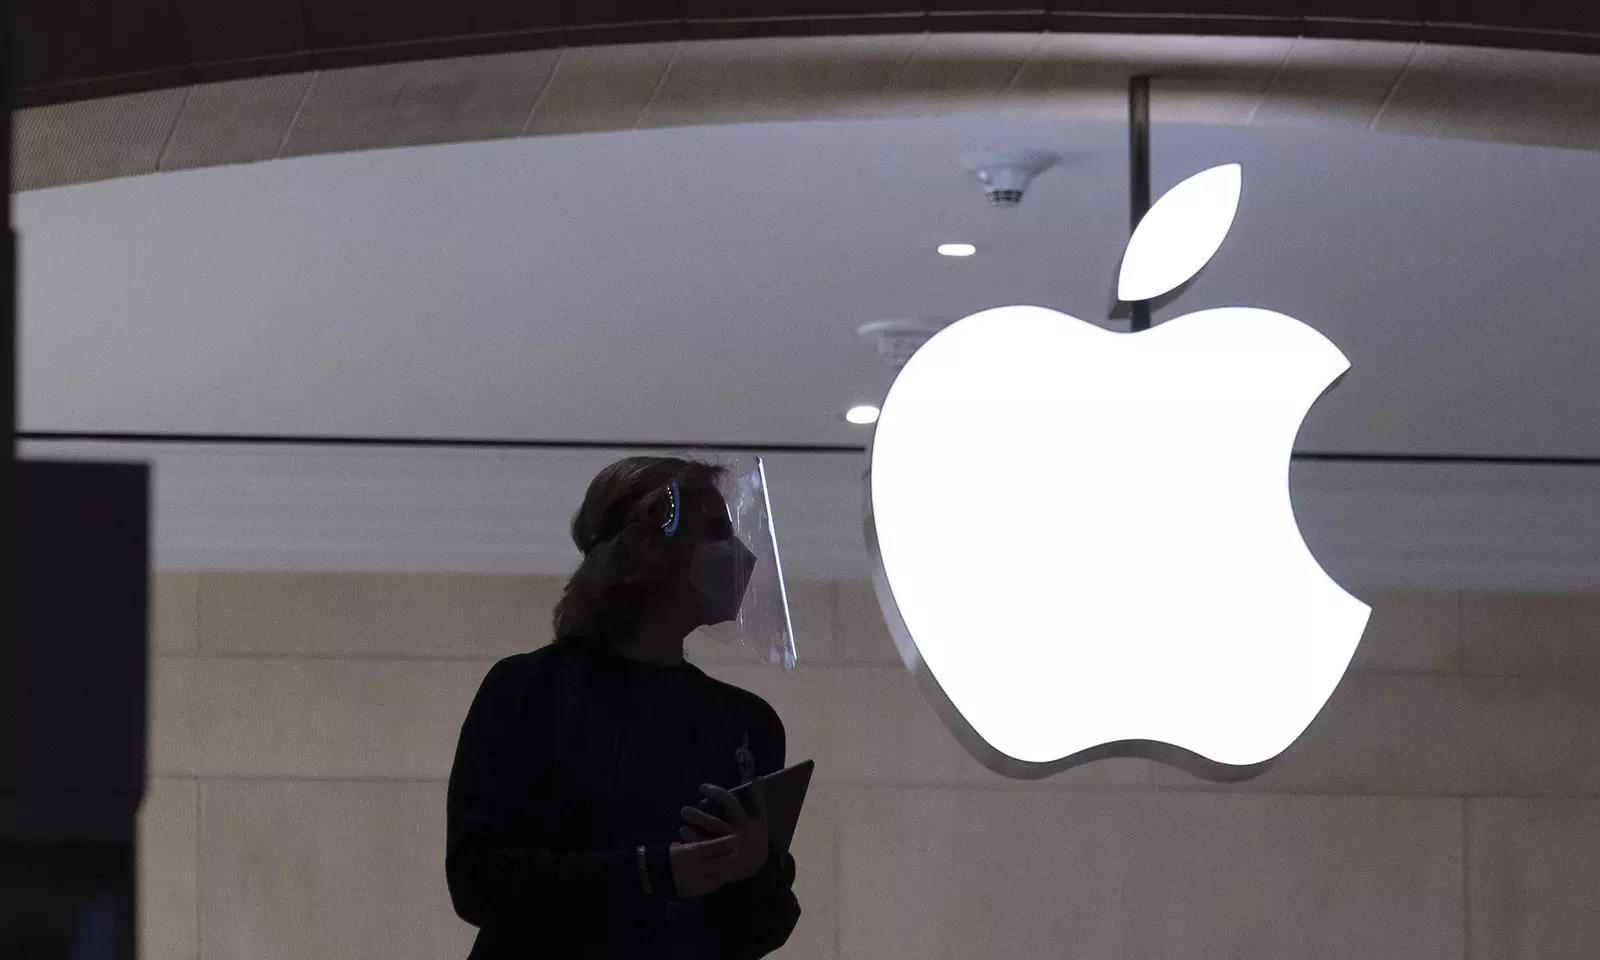 New Research Suggests Apple Is Tracking Users Even When Their Privacy Settings Turned Off!